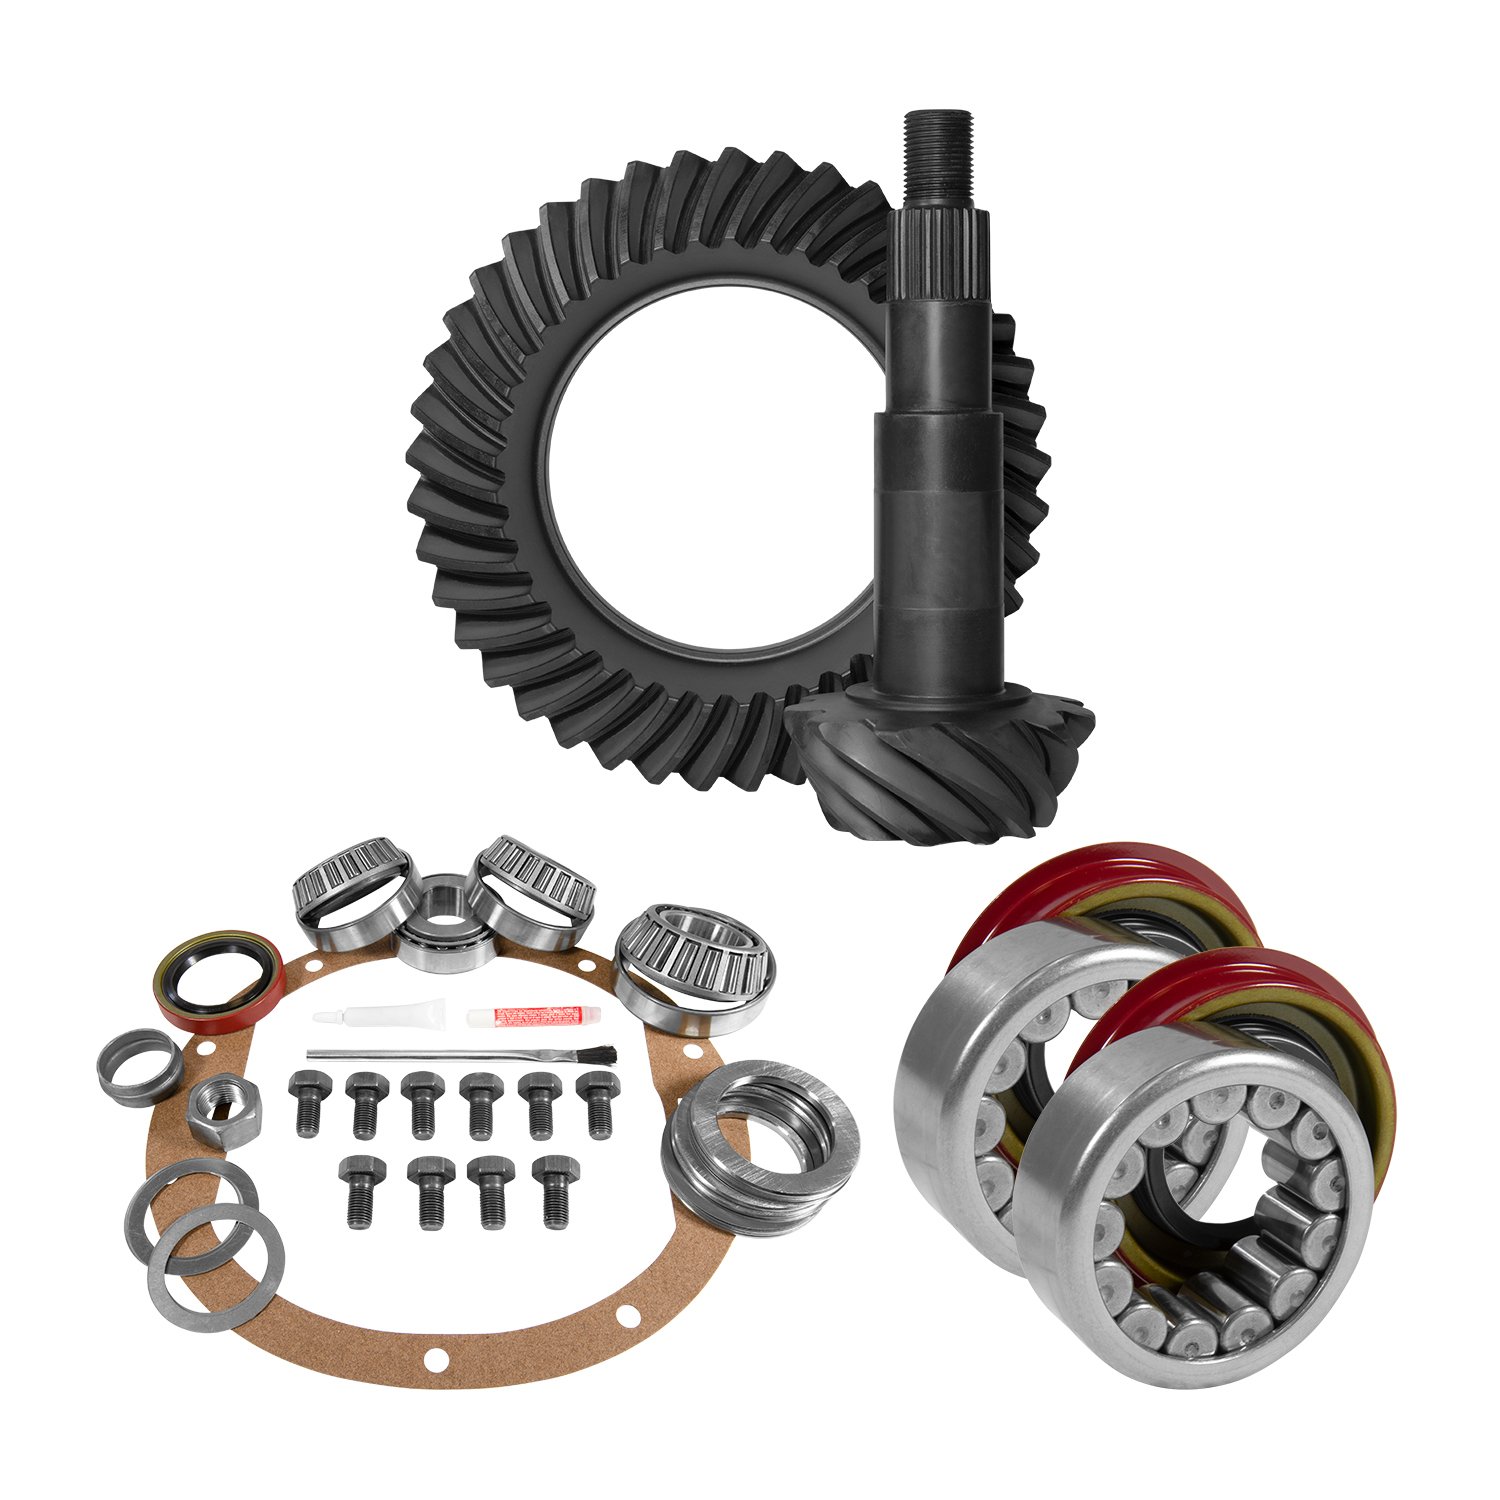 USA Standard 10723 8.5 in. GM 3.73 Rear Ring & Pinion Install Kit, Axle Bearings, 1.625 in. Case Journal